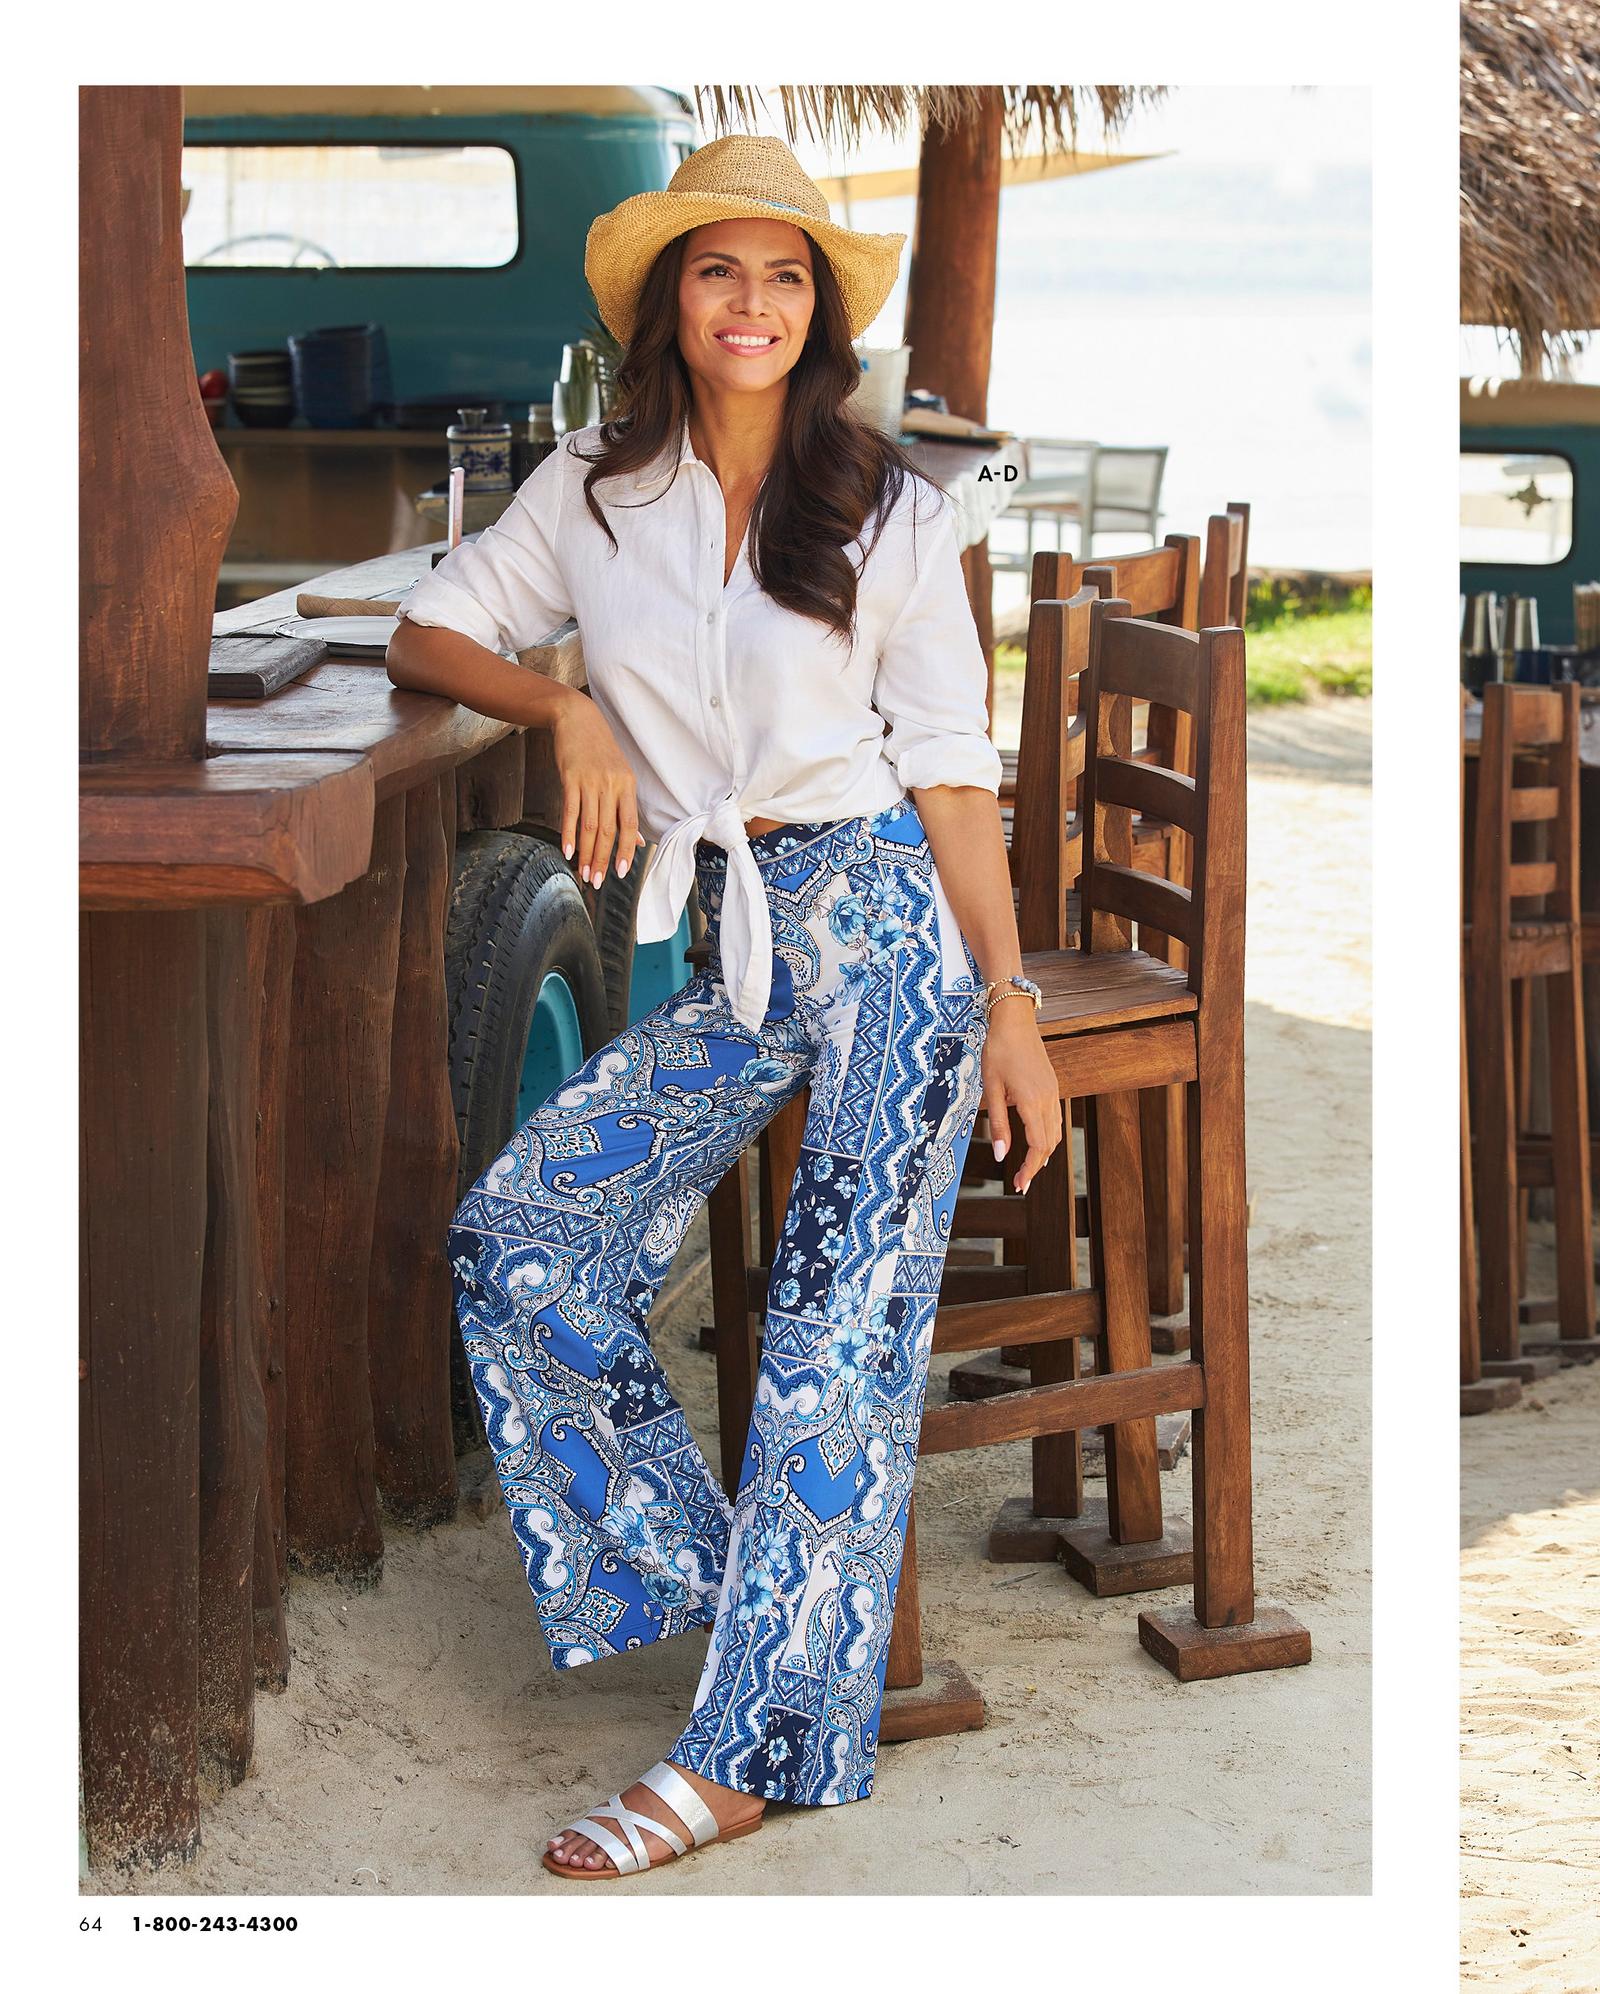 model wearing a white tie-front long-sleeve linen shirt, cowboy hat, blue tile print palazzo pants, and silver sandals.